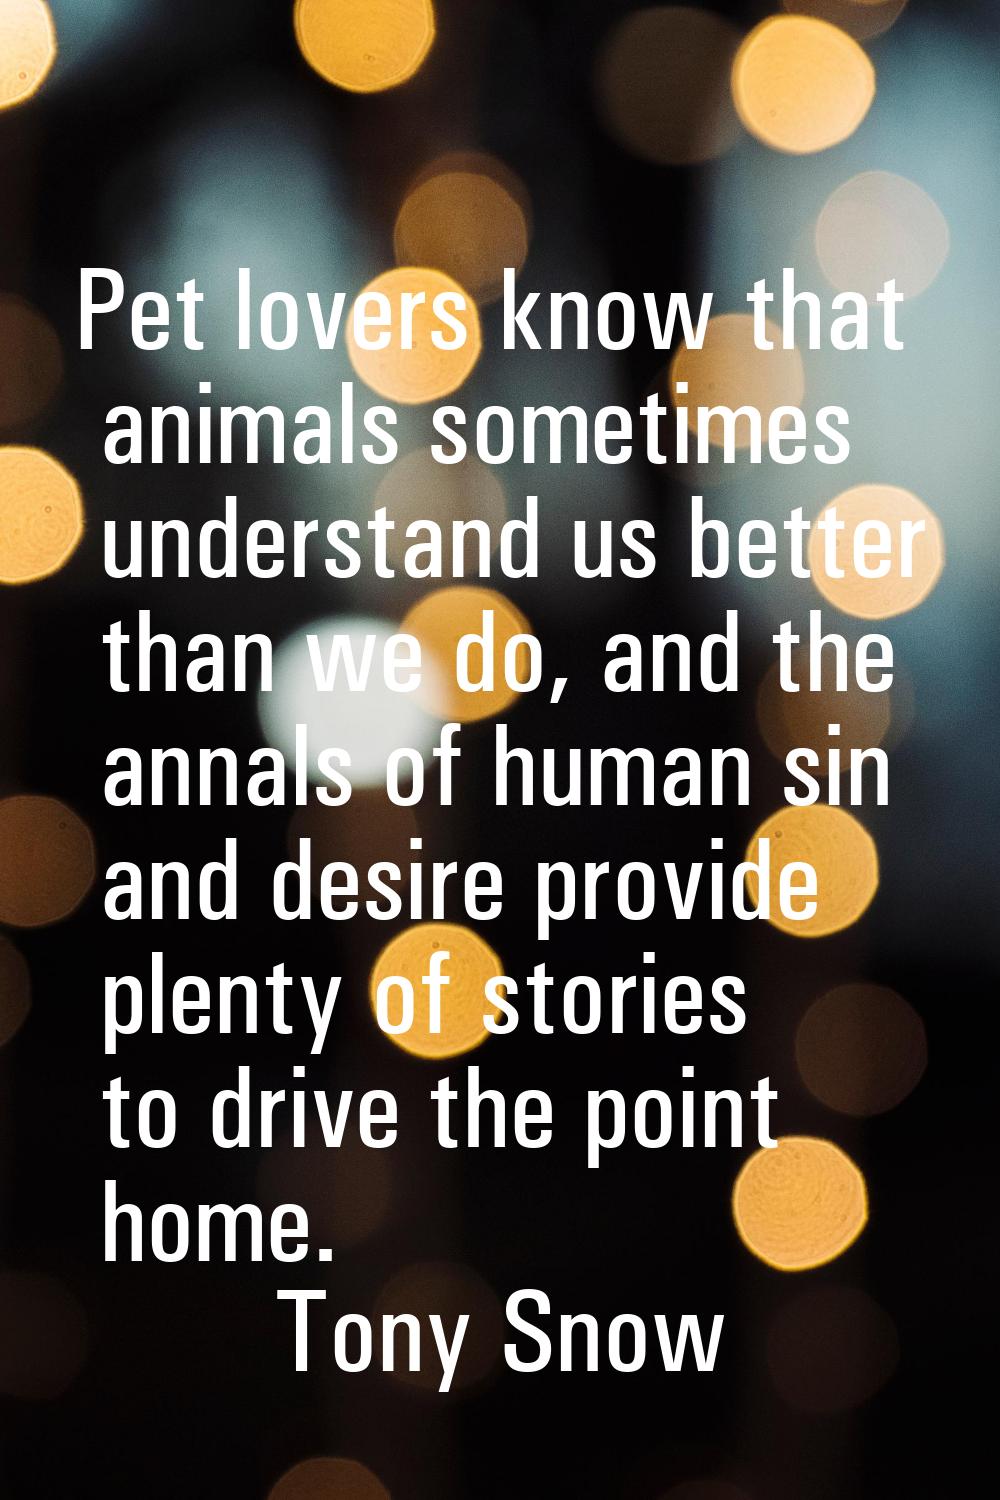 Pet lovers know that animals sometimes understand us better than we do, and the annals of human sin